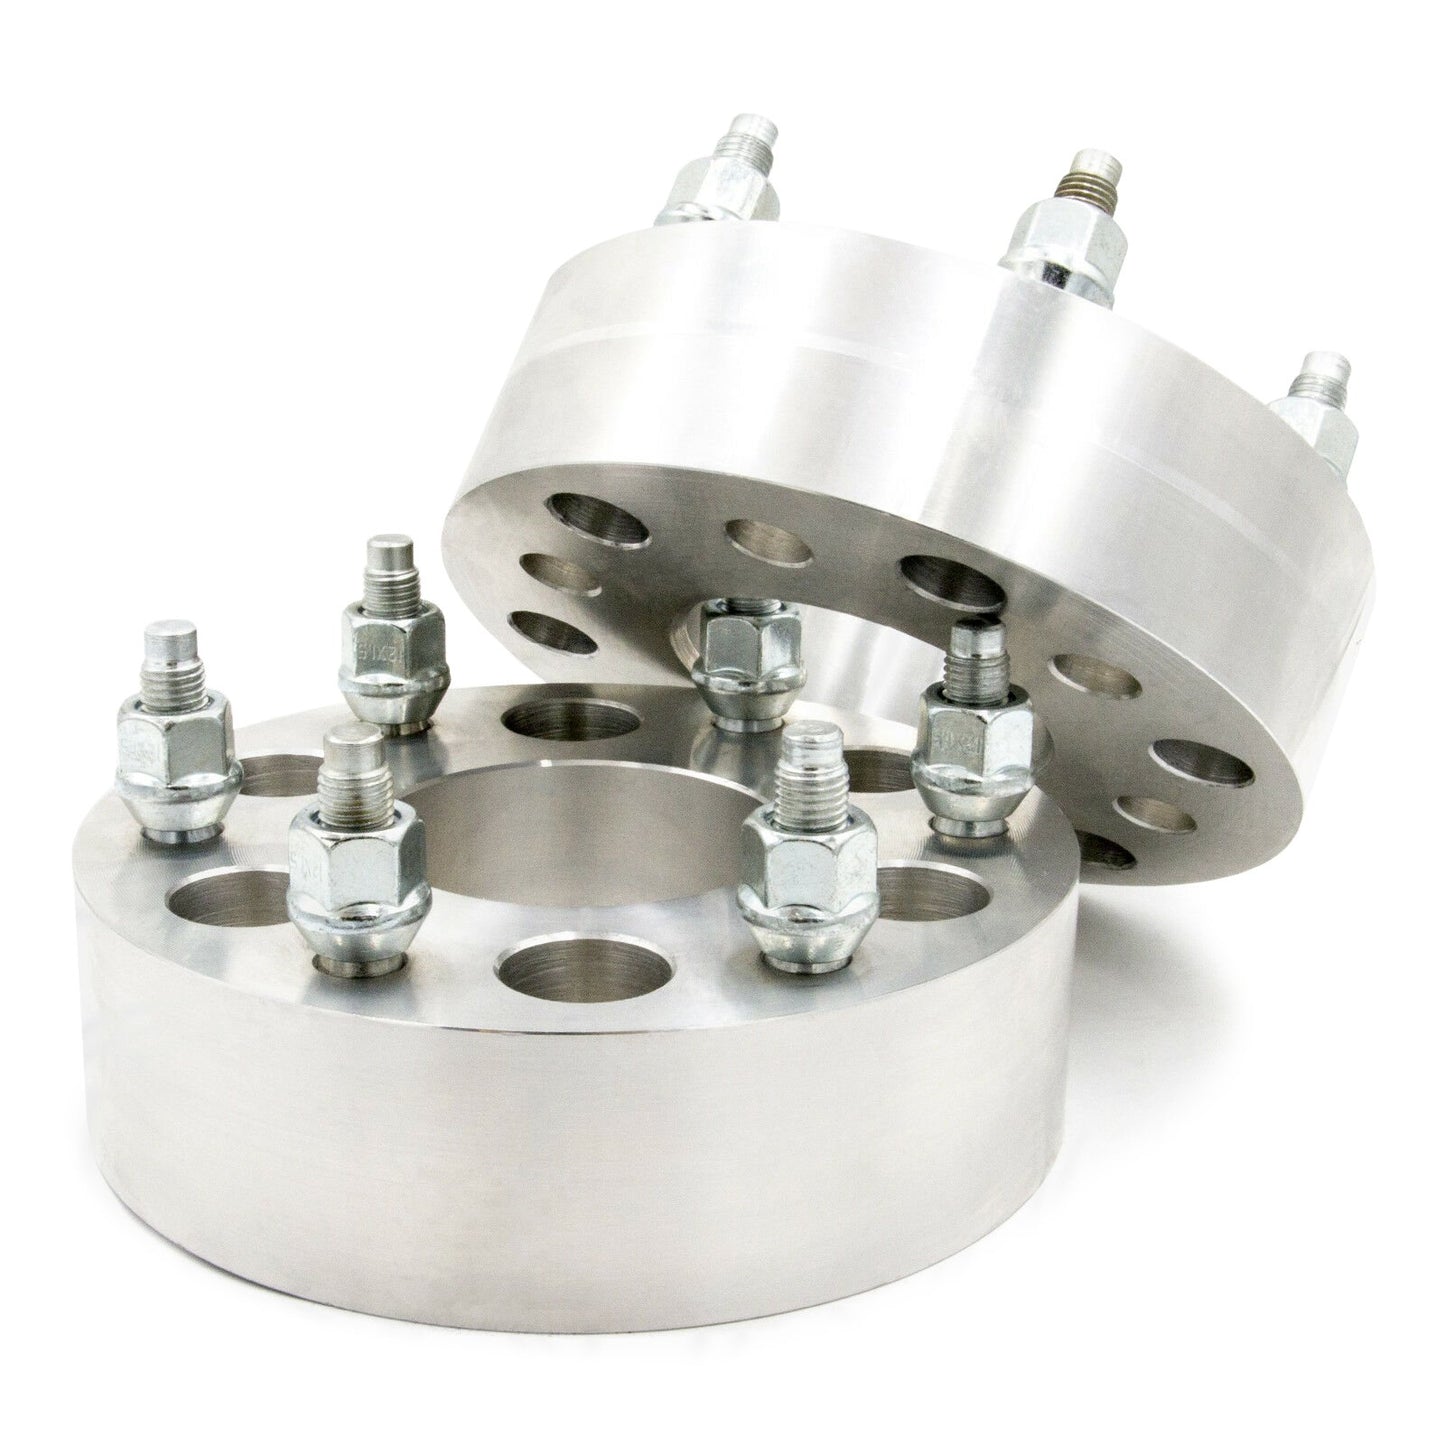 6x4.5" to 6x5.5" Wheel Spacer/Adapter - Thickness: 3/4"- 4"